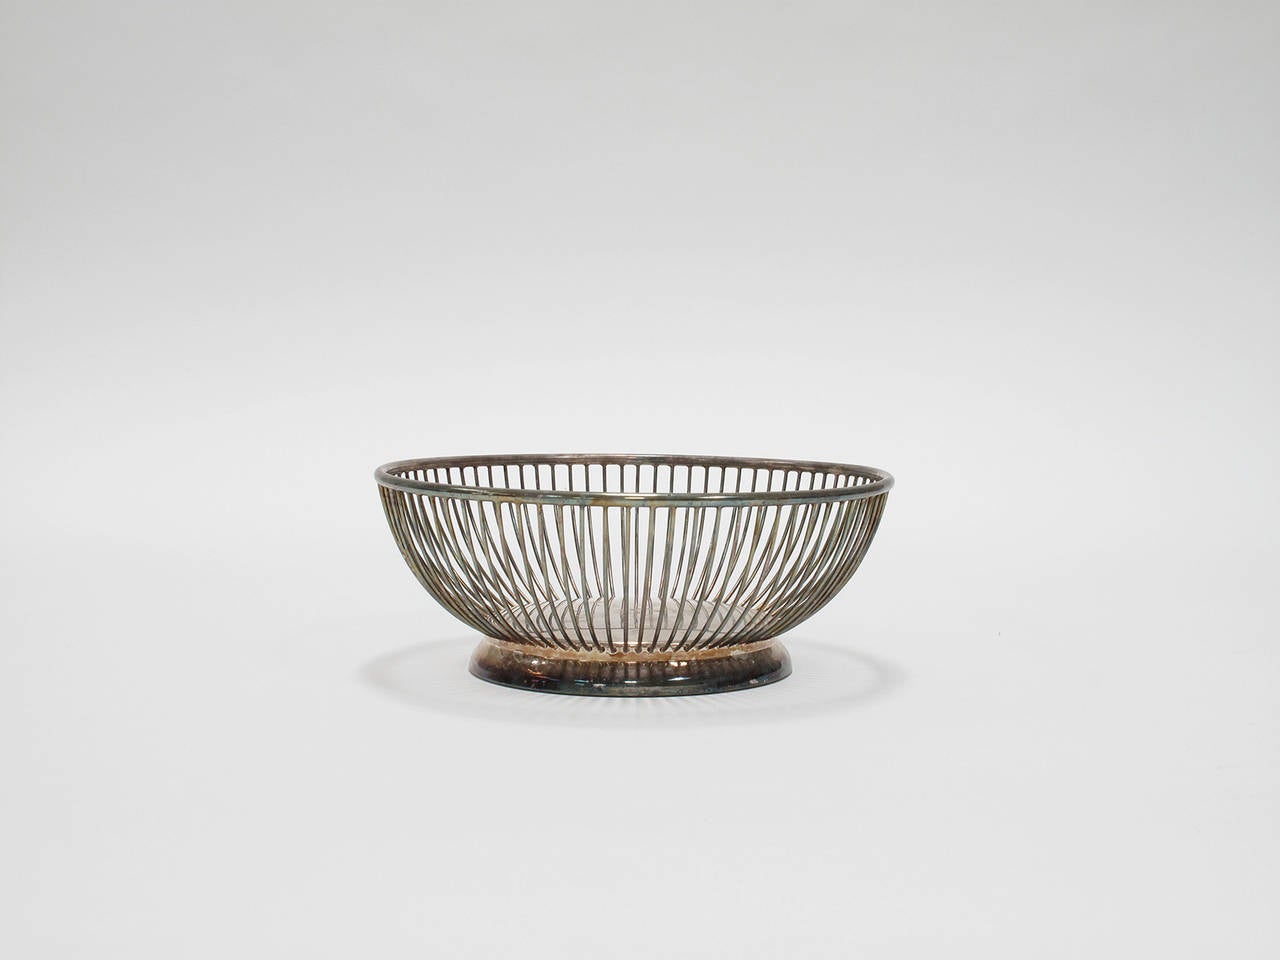 Decorative and functional, silver plated round wire basket for the display of breads, fruits or spools of imported cashmere.